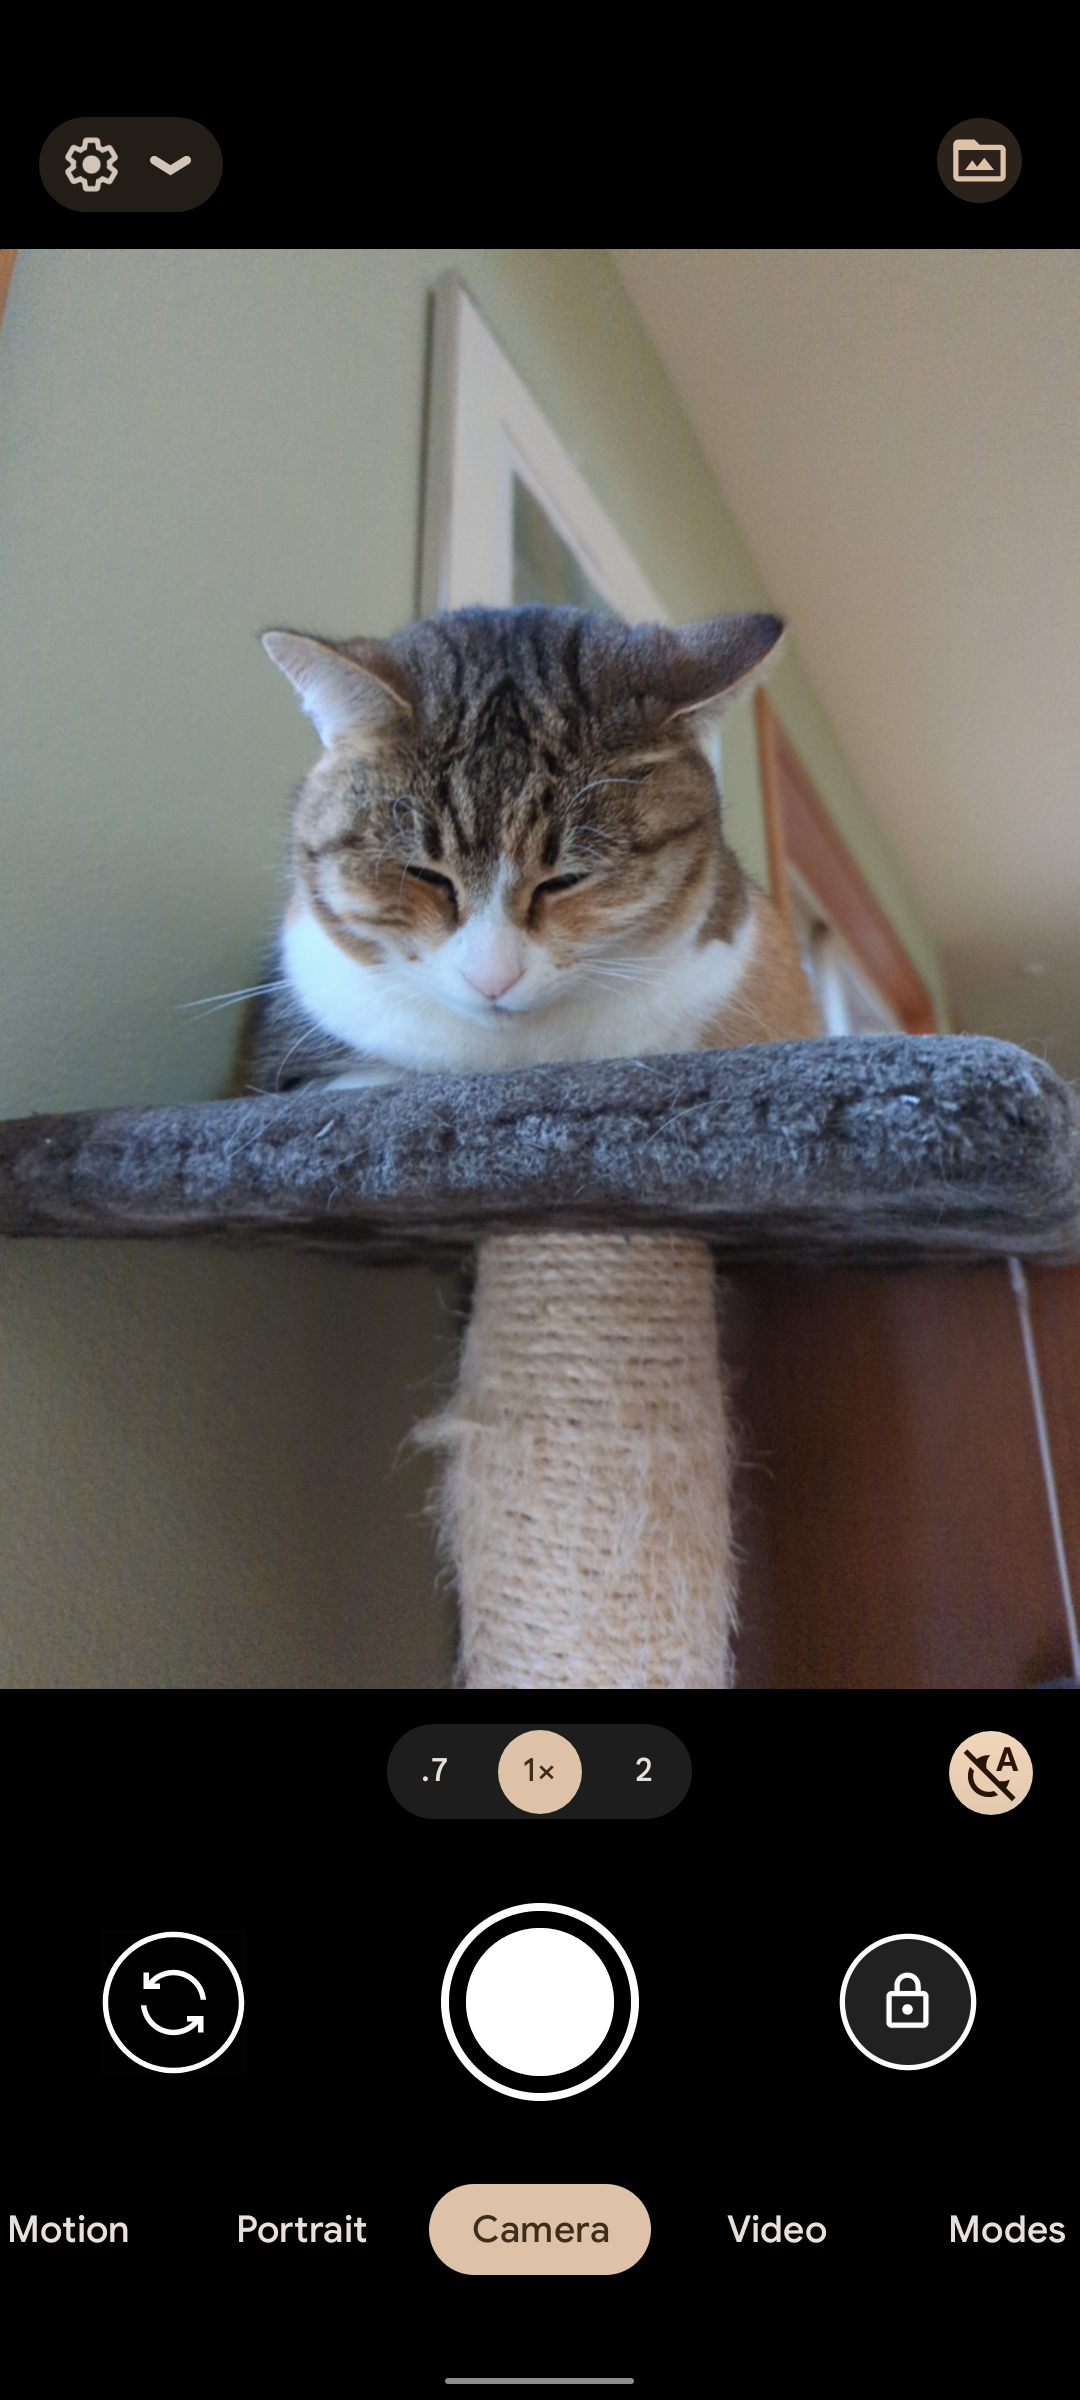 Screenshot of Google Pixel smartphone camera app with an image of a cat